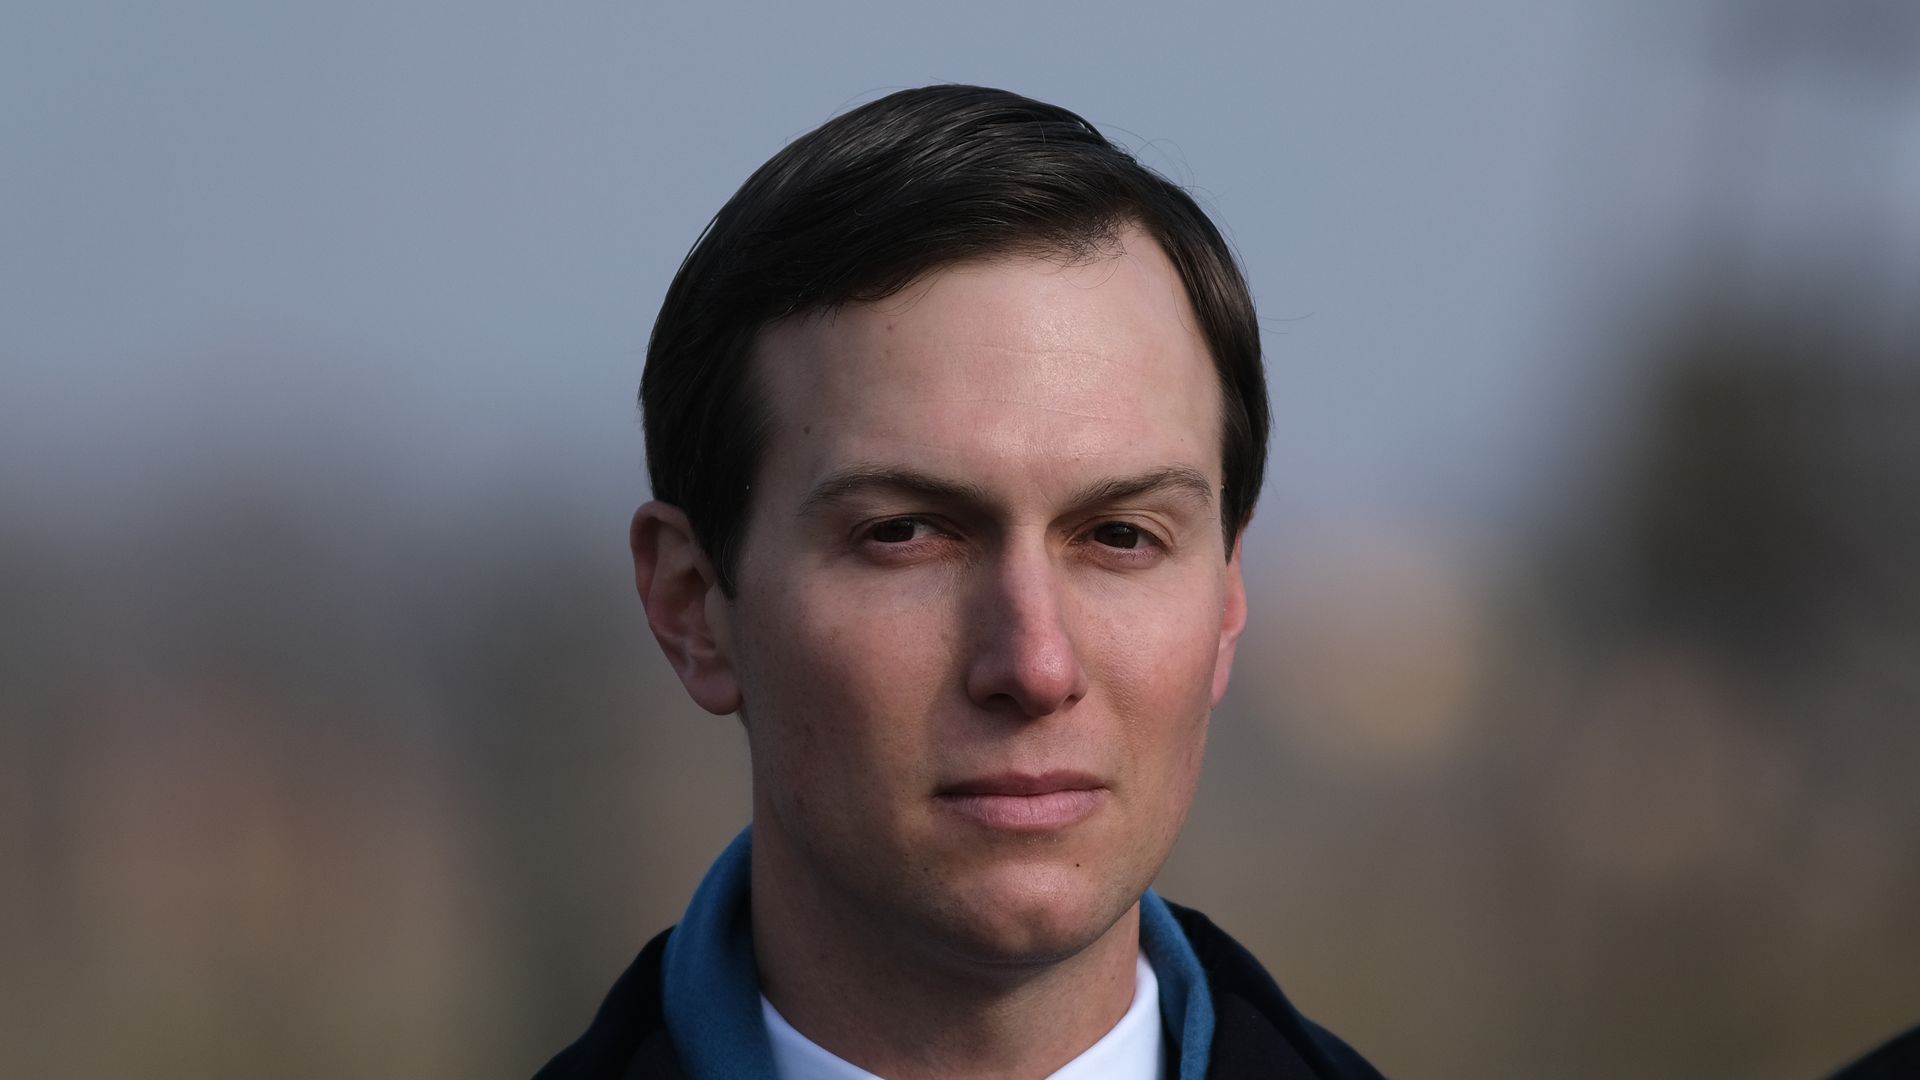 In this image, Jared Kushner looks at the camera in a suit and jacket.